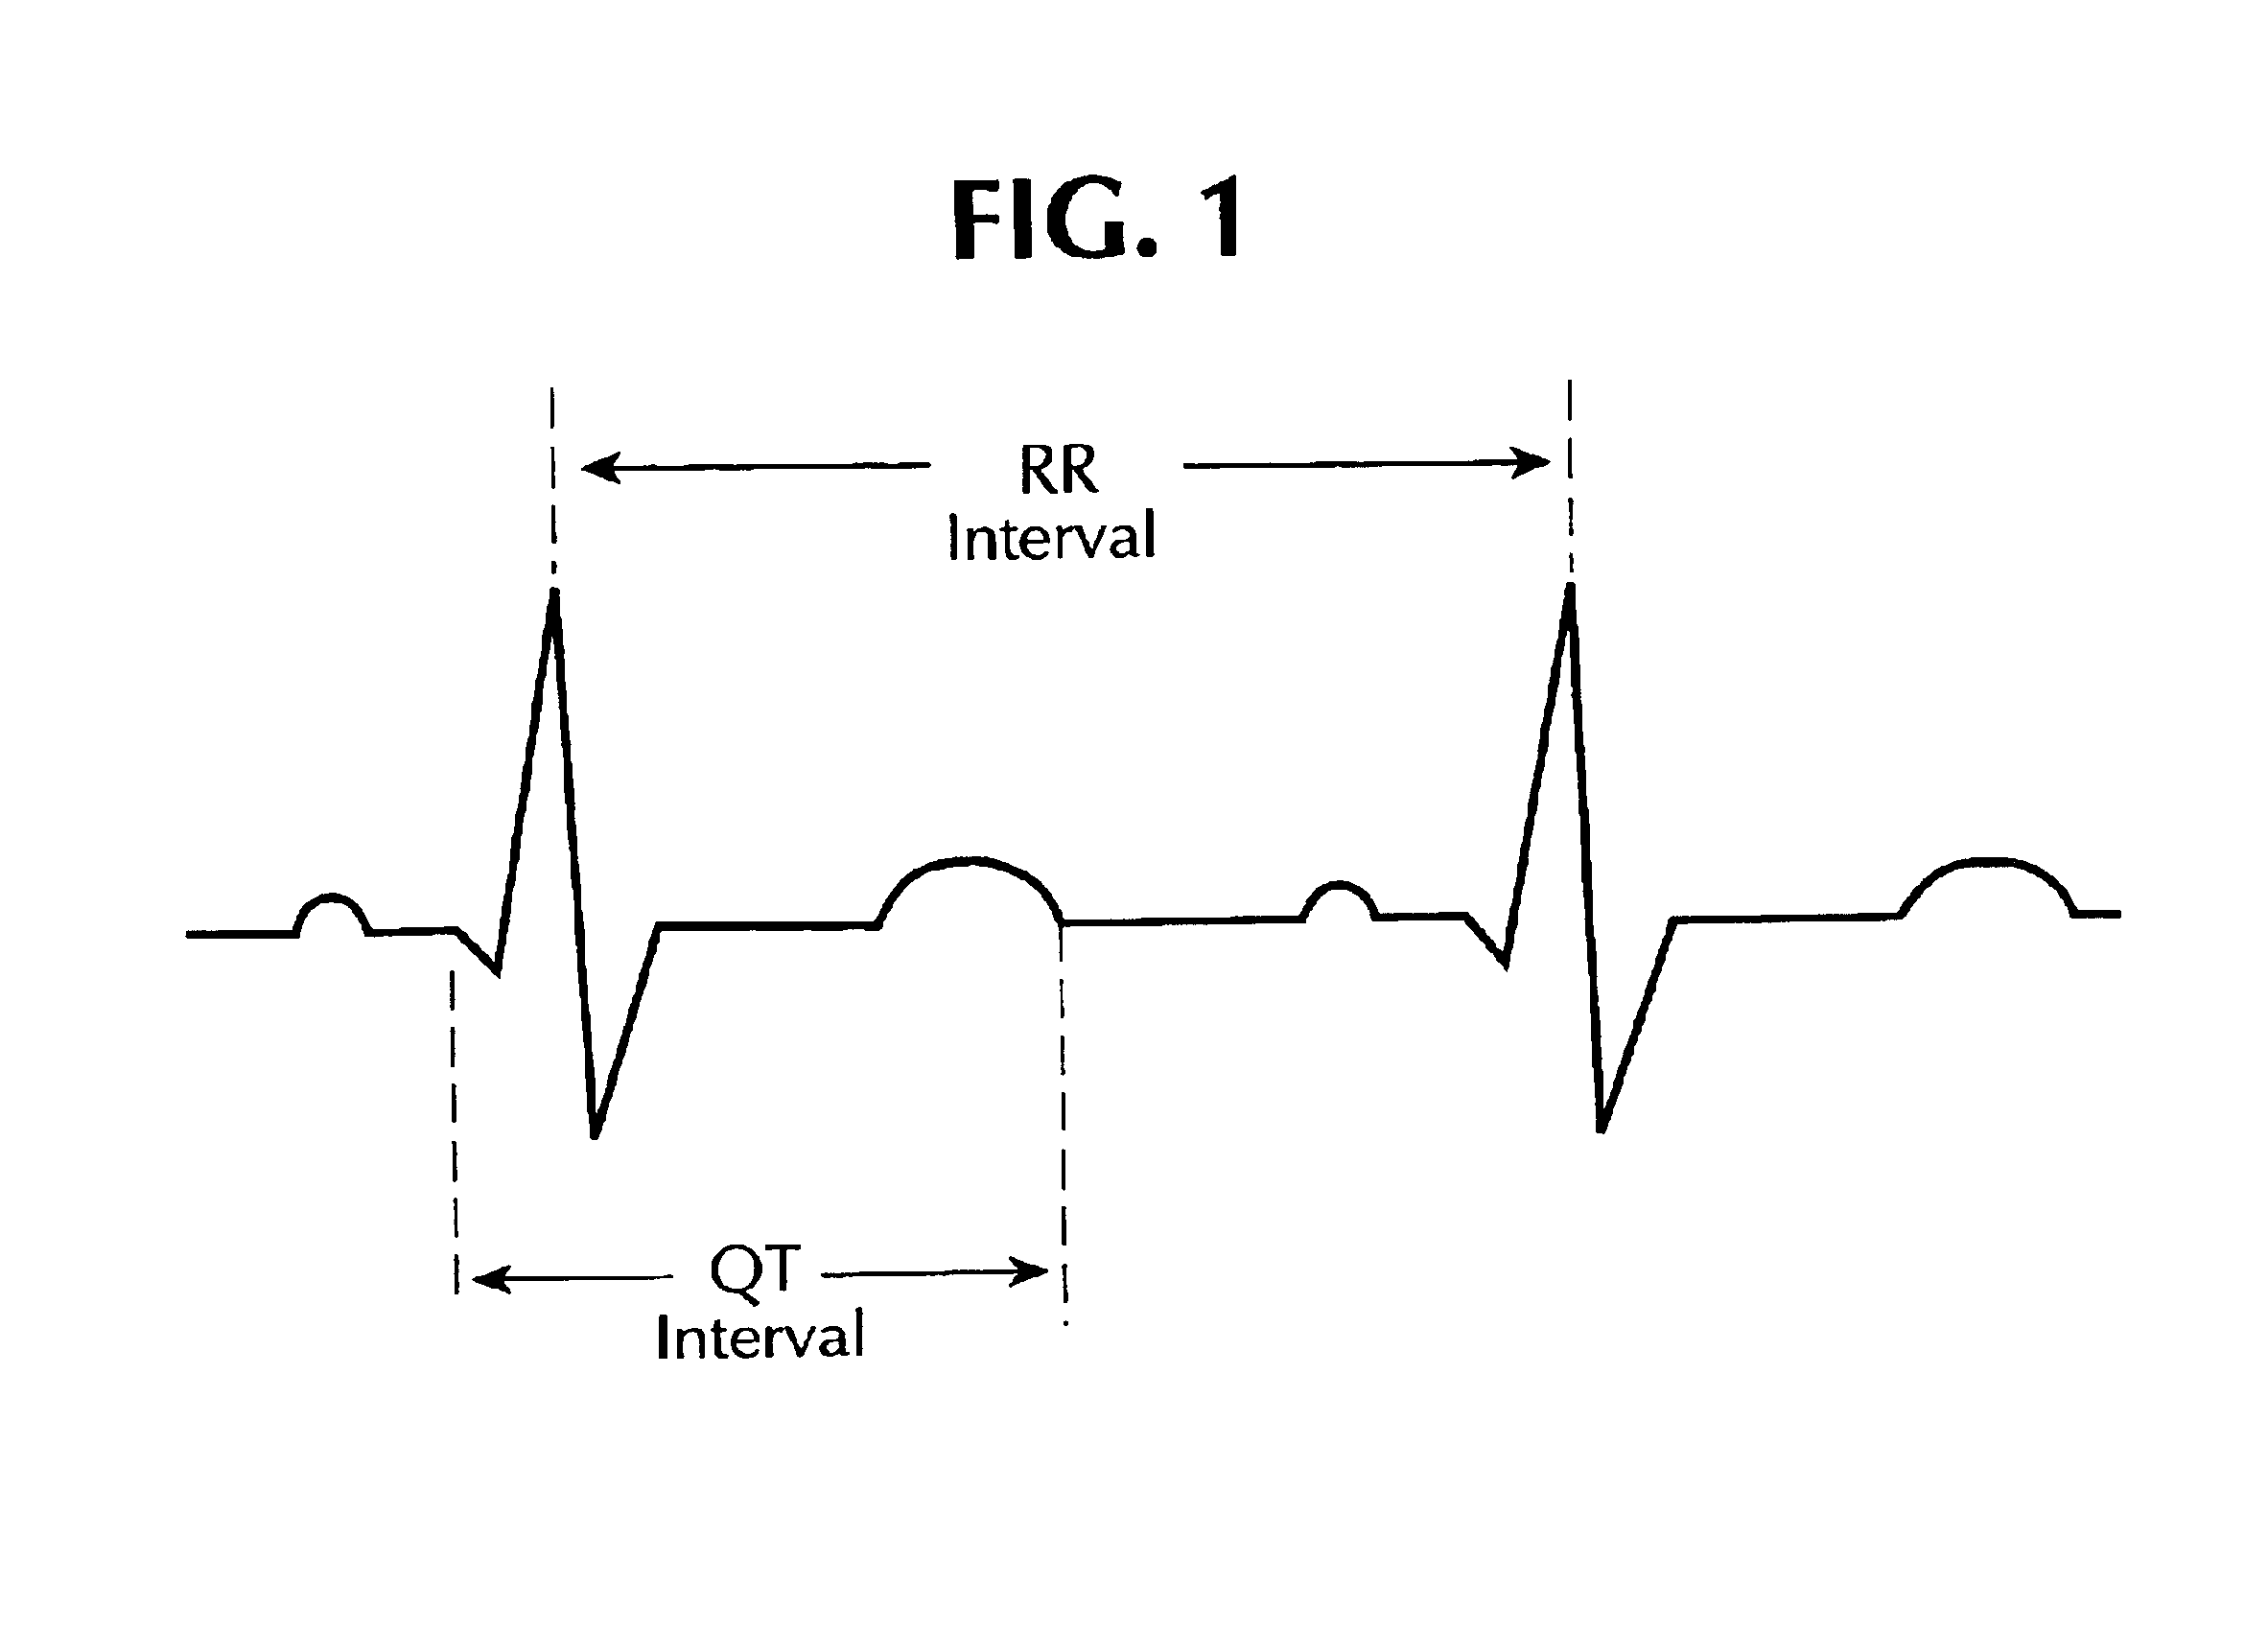 System and method for statistical analysis of QT interval as a function of changes in RR interval